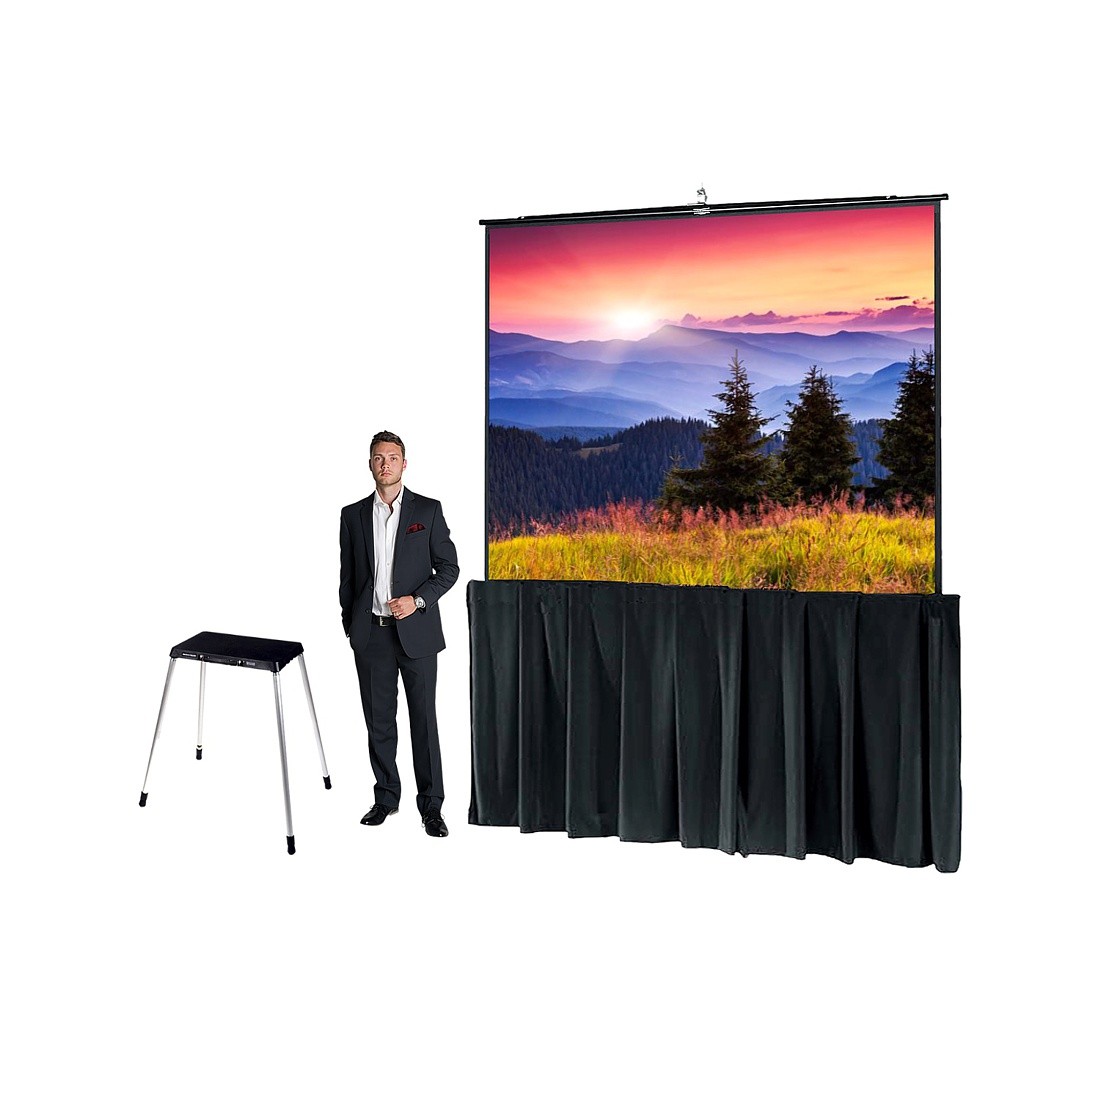 Medium Event Projector Support Package